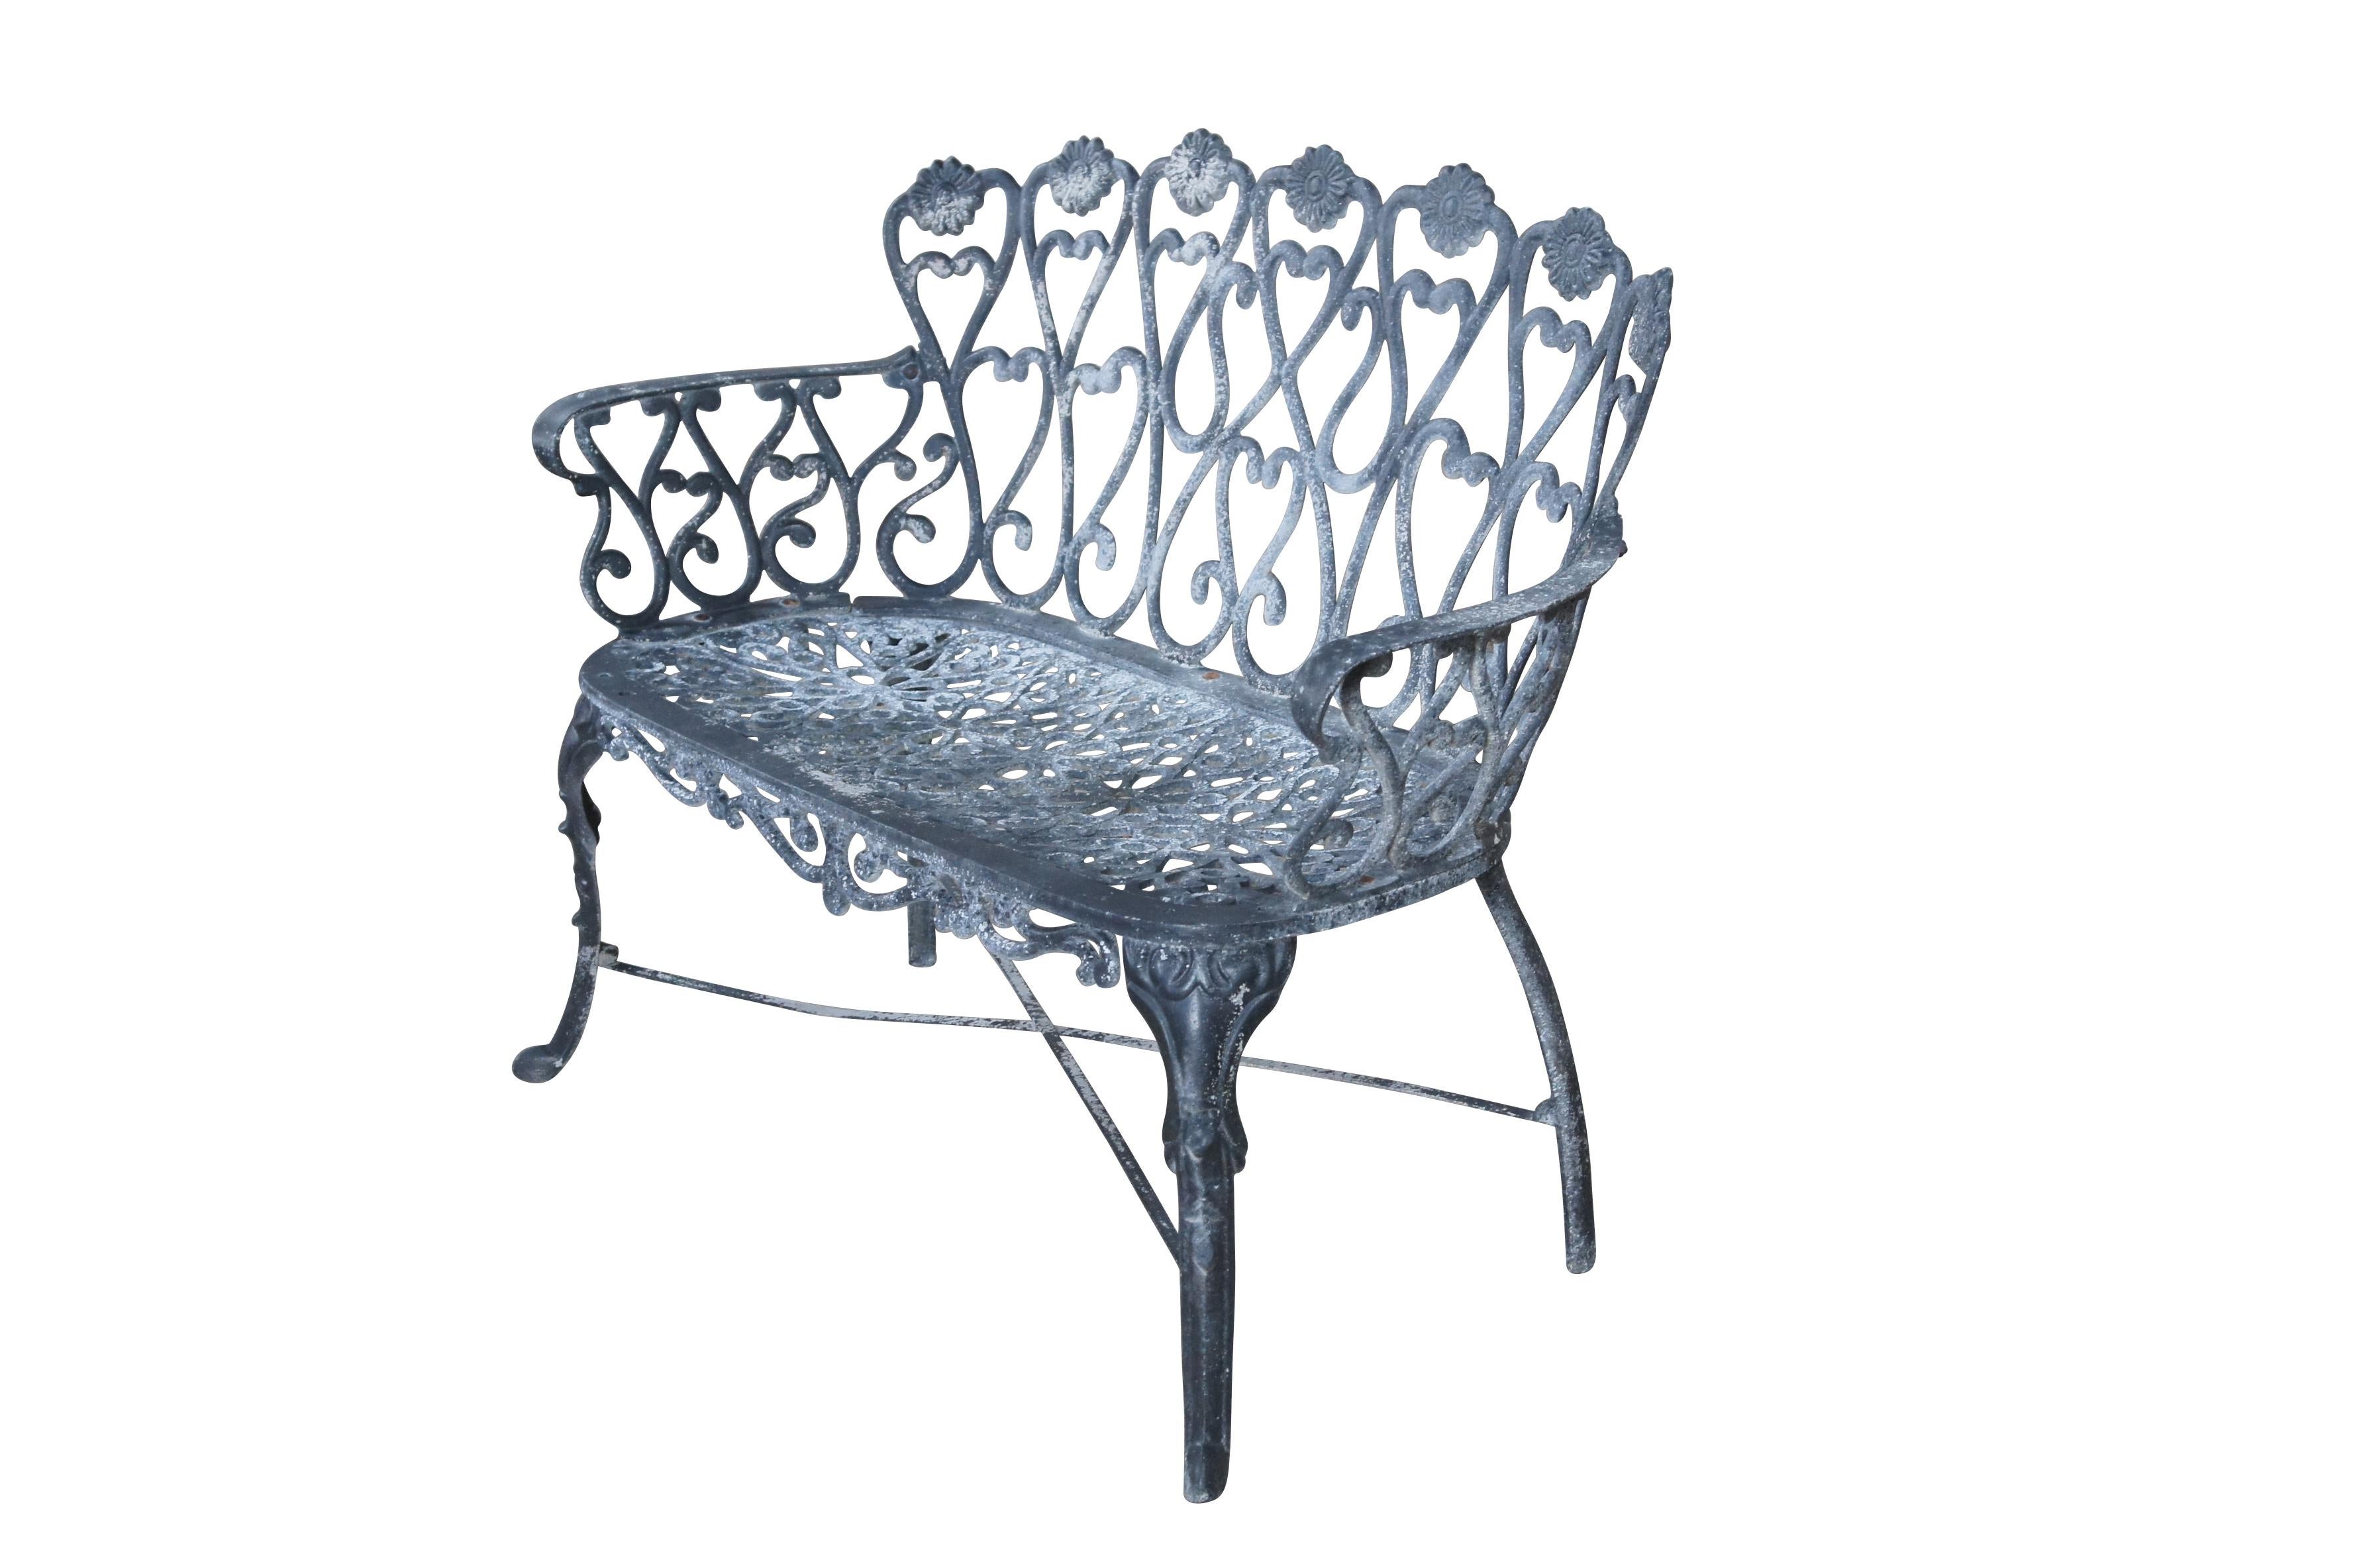 A cast aluminum outdoor garden settee with prominent scrolls, floral medallions, x-form stretcher and resting on front pad feet.

Dimensions:
41